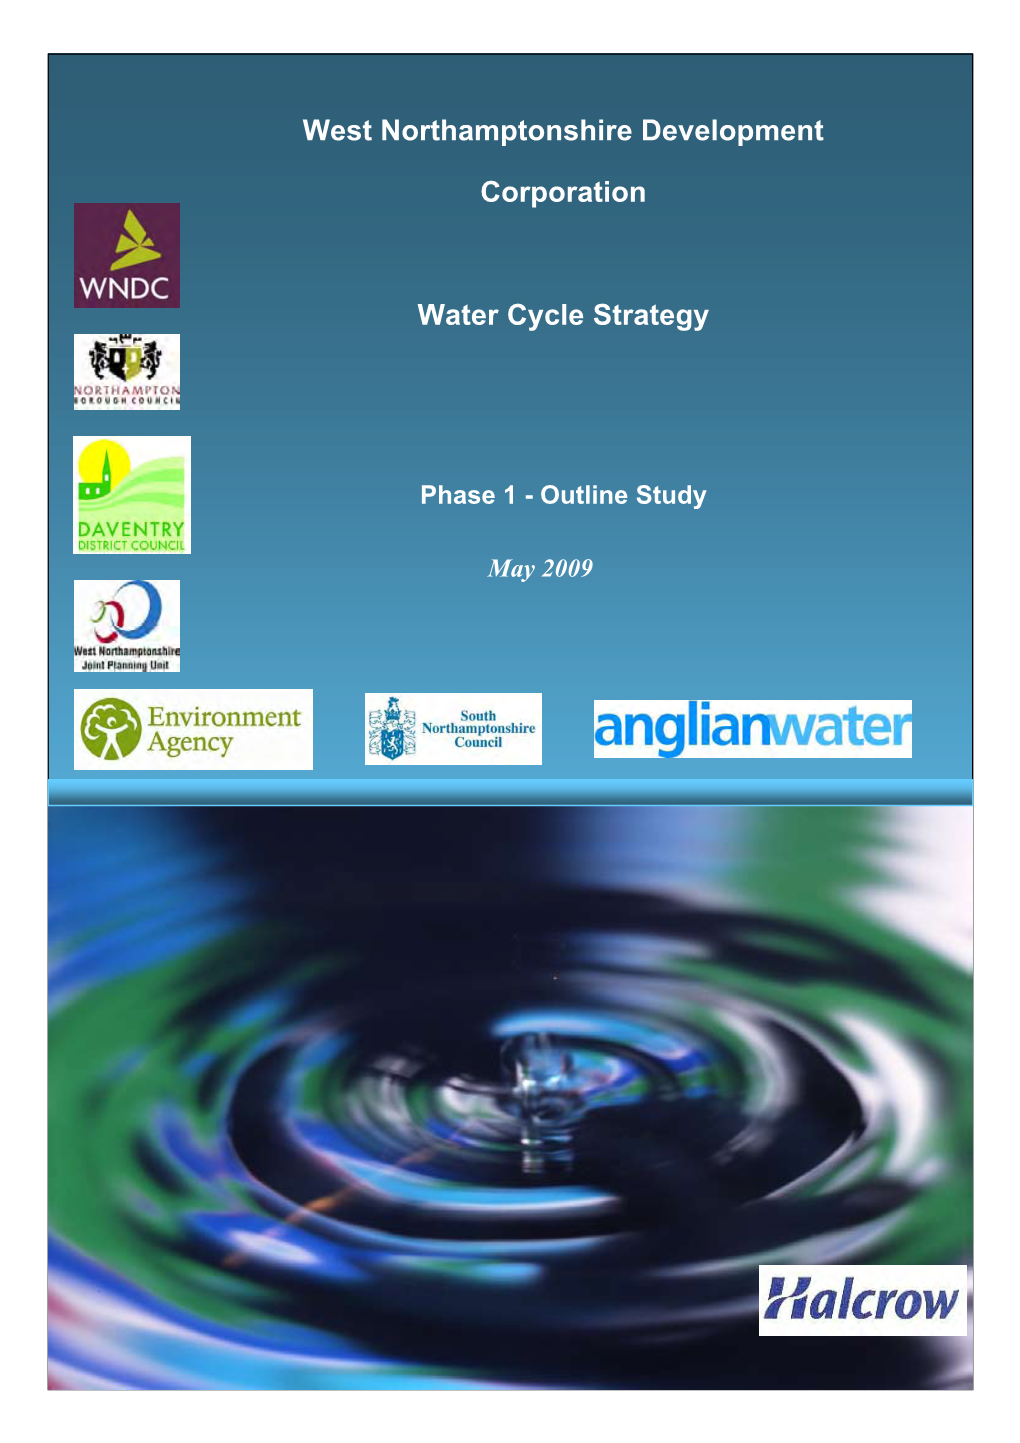 West Northamptonshire Development Corporation Water Cycle Strategy